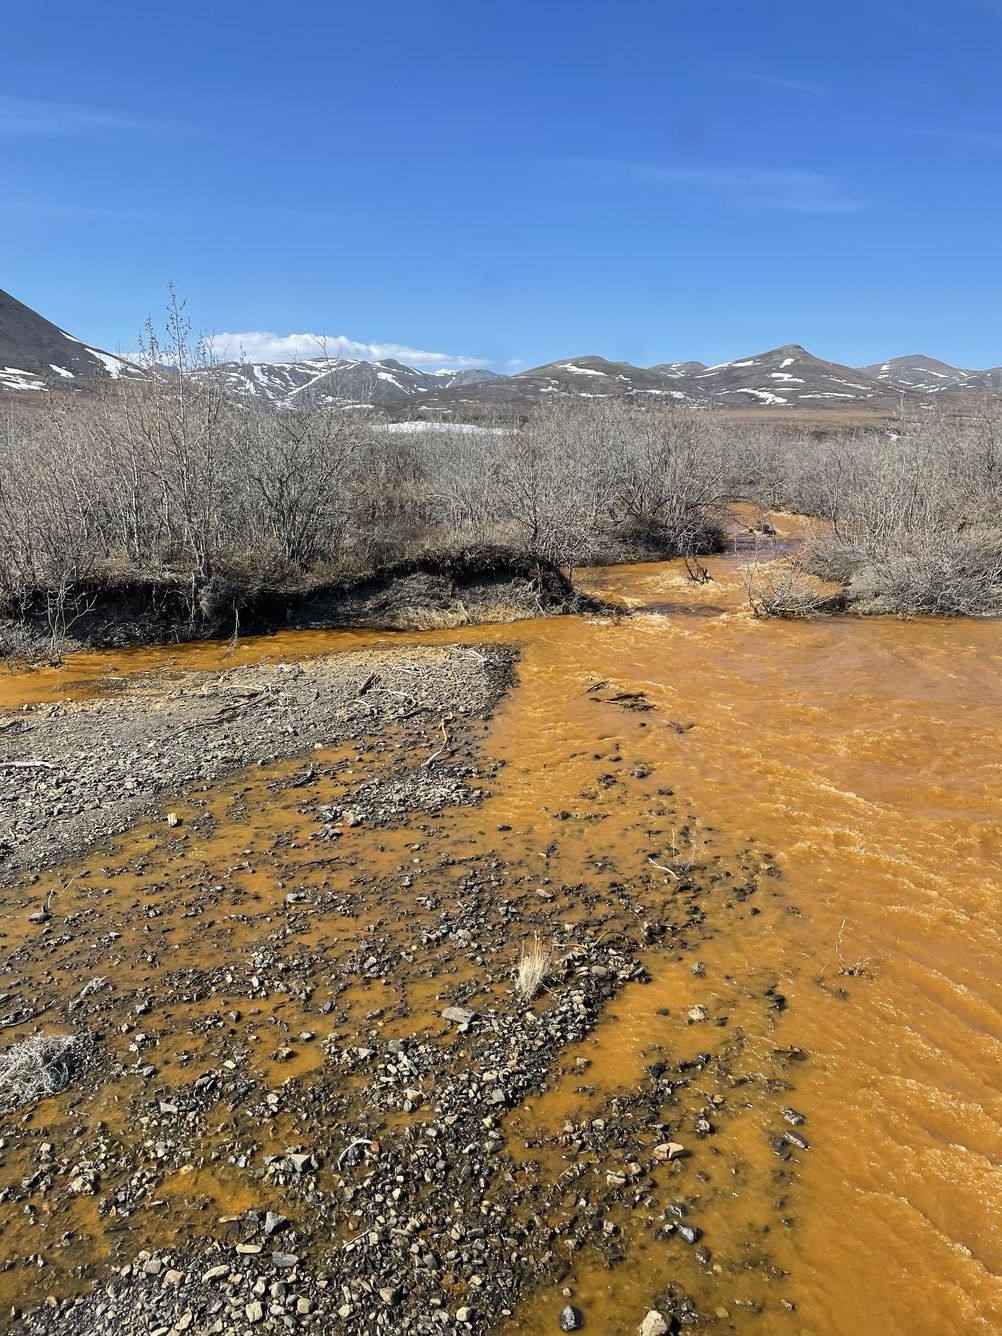 Alaska's Rivers Are Turning Orange as Thawing Permafrost Releases Metals Into Waterways